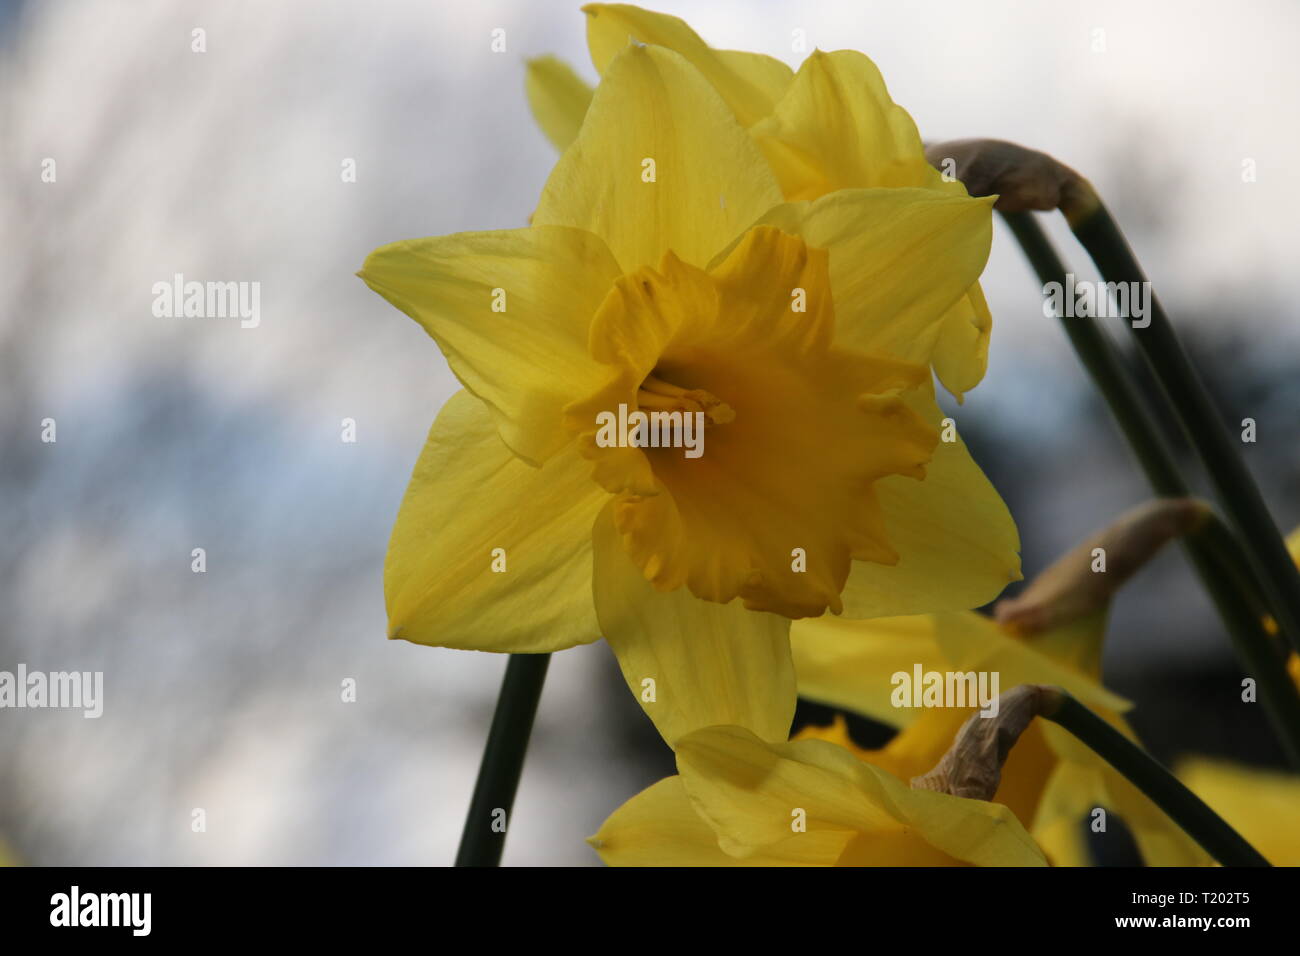 Tipi Di Fiori Gialli.Yellow Flowers Named Narcissus Or Daffodil In The Grass In The